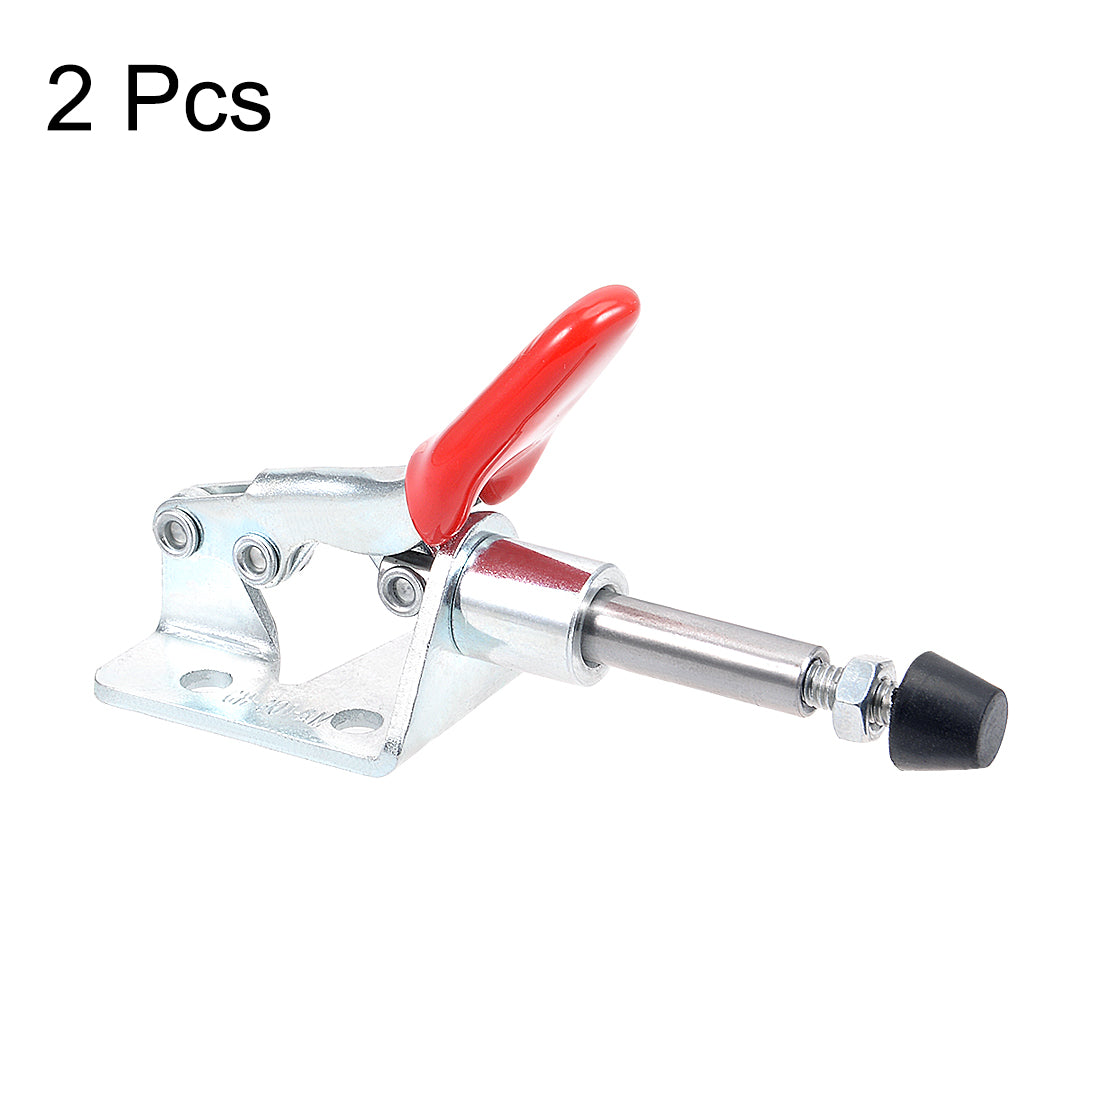 uxcell Uxcell Toggle Clamp 50kg 110lbs Holding Capacity 16mm Stroke Push Pull Action Hand Tool GH-301-AM 2pcs